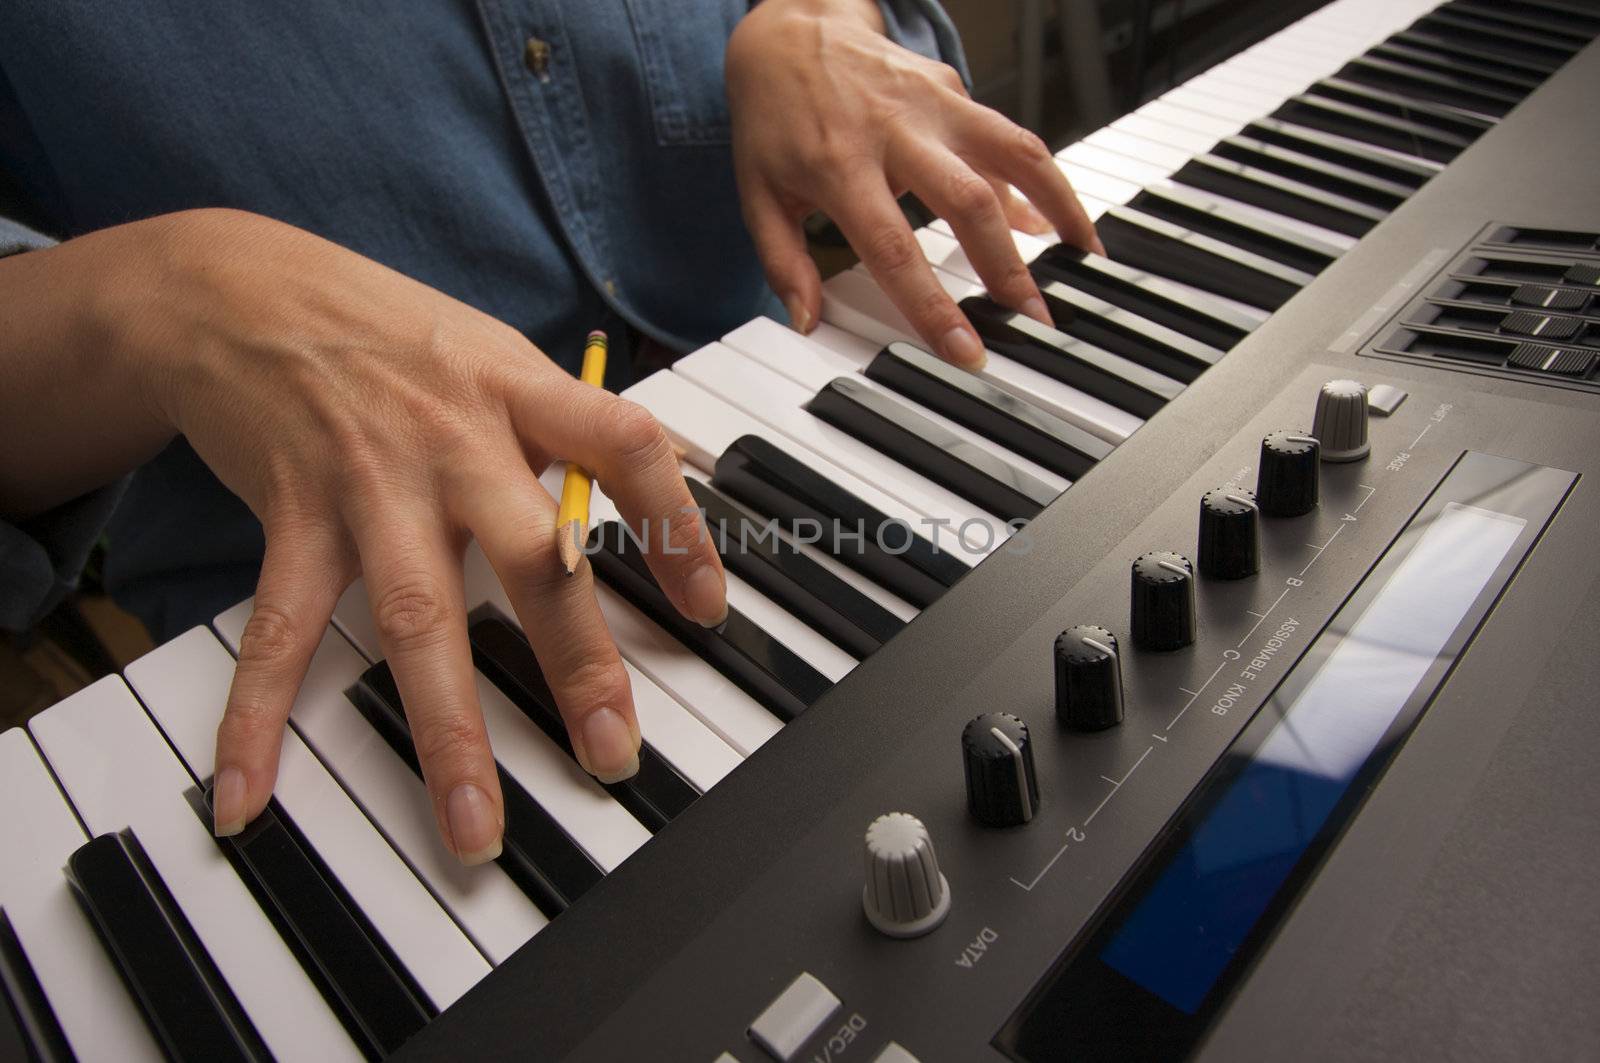 Woman's Fingers on Digital Piano Keys by Feverpitched